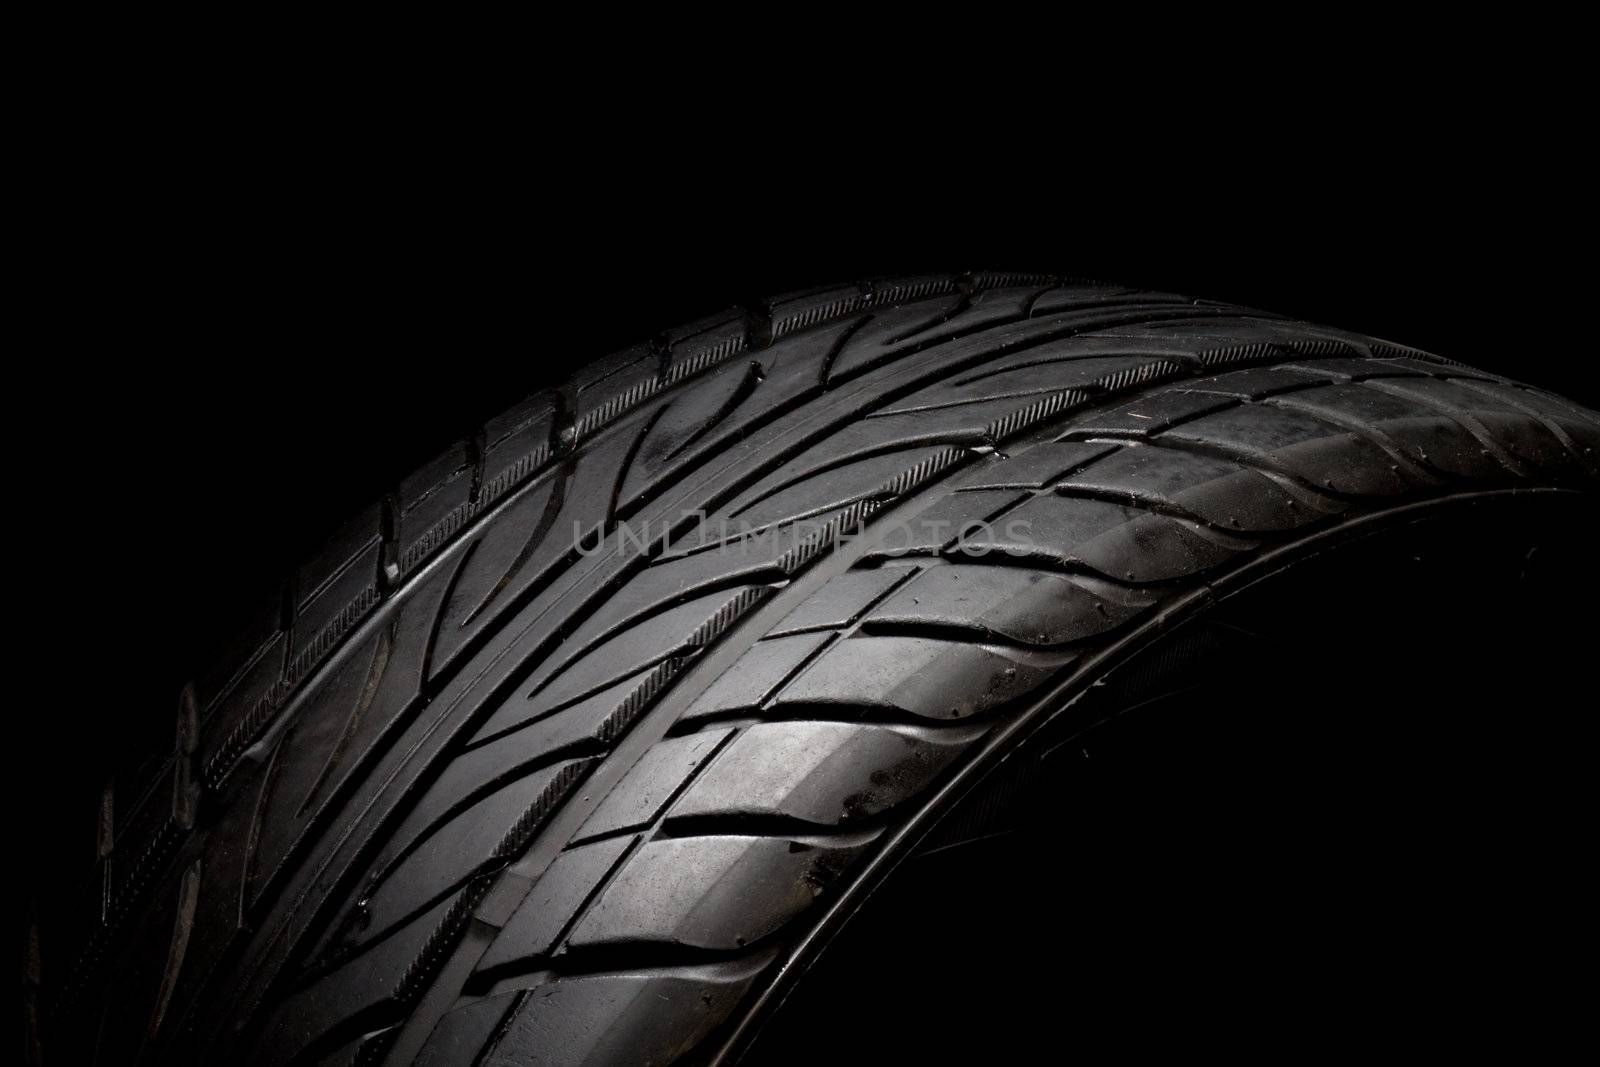 car tire, photo on the white background